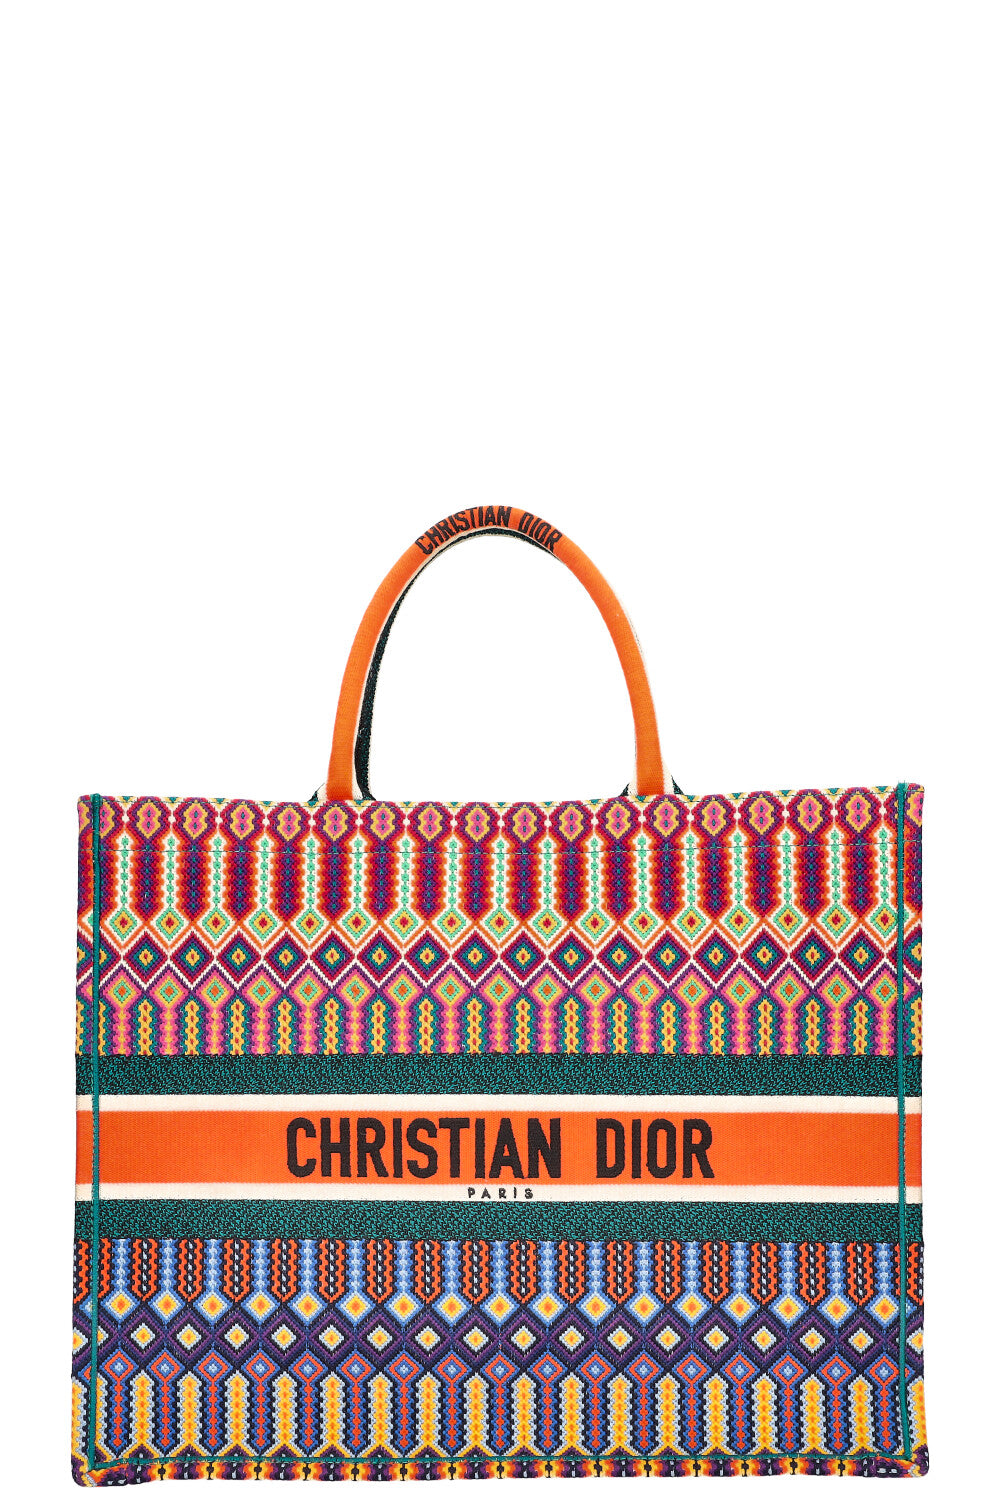 CHRISTIAN DIOR Book Tote Large